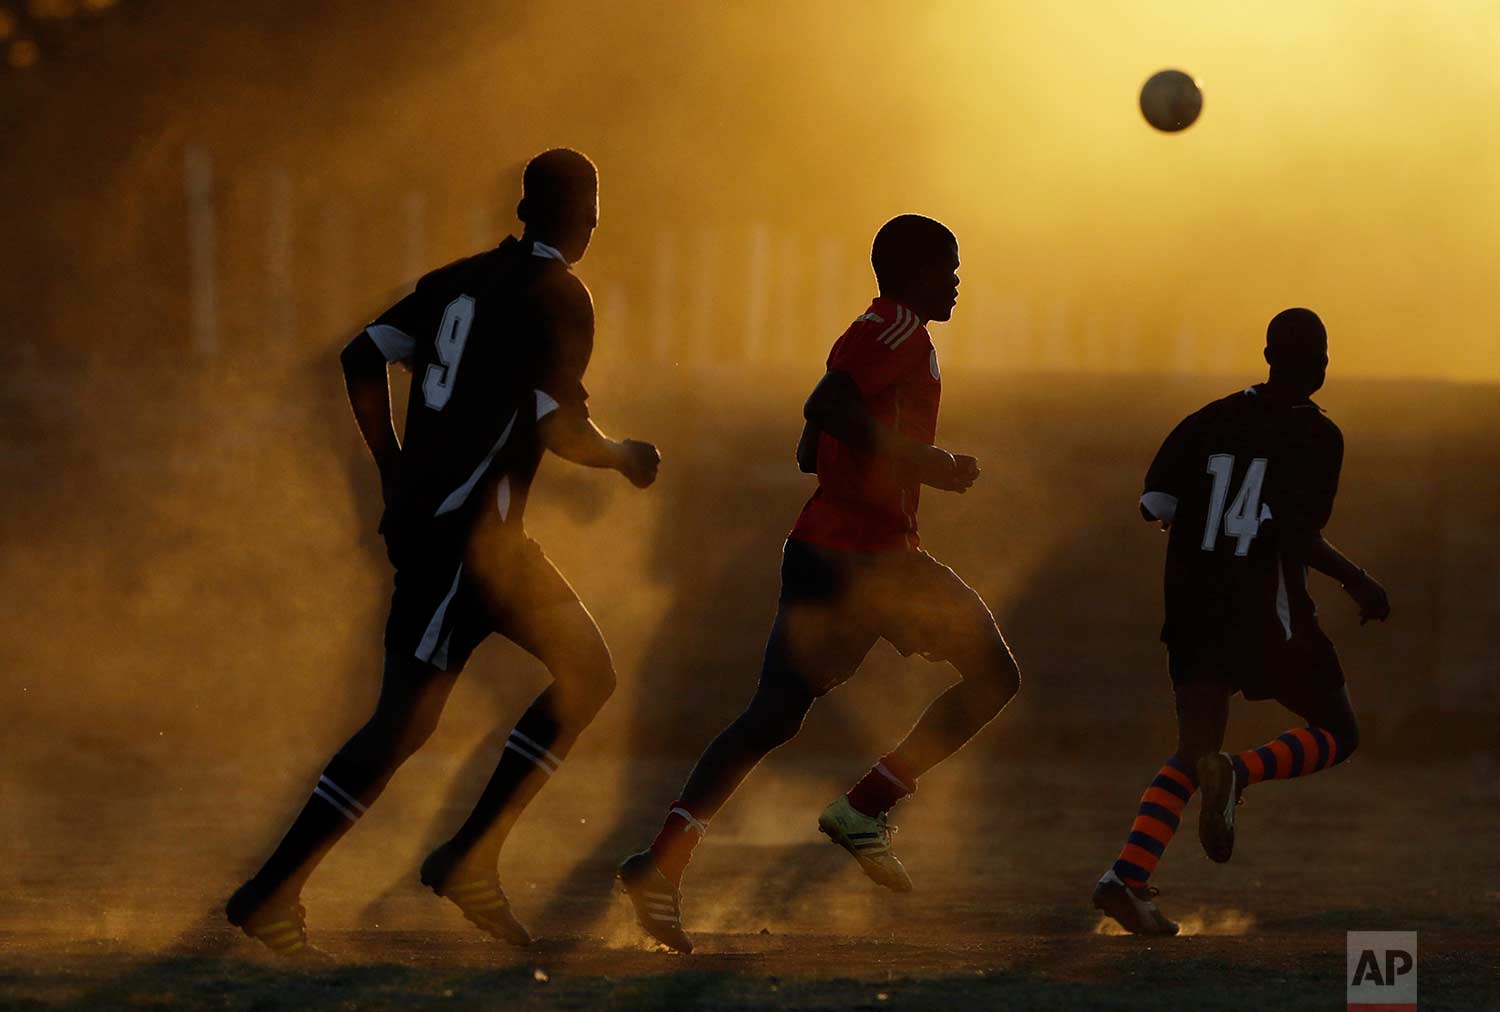  Players chase the ball on a dusty field during their soccer match in Nigel, east of Johannesburg, South Africa, Sunday, Sept. 3, 2017. (AP Photo/Themba Hadebe) 